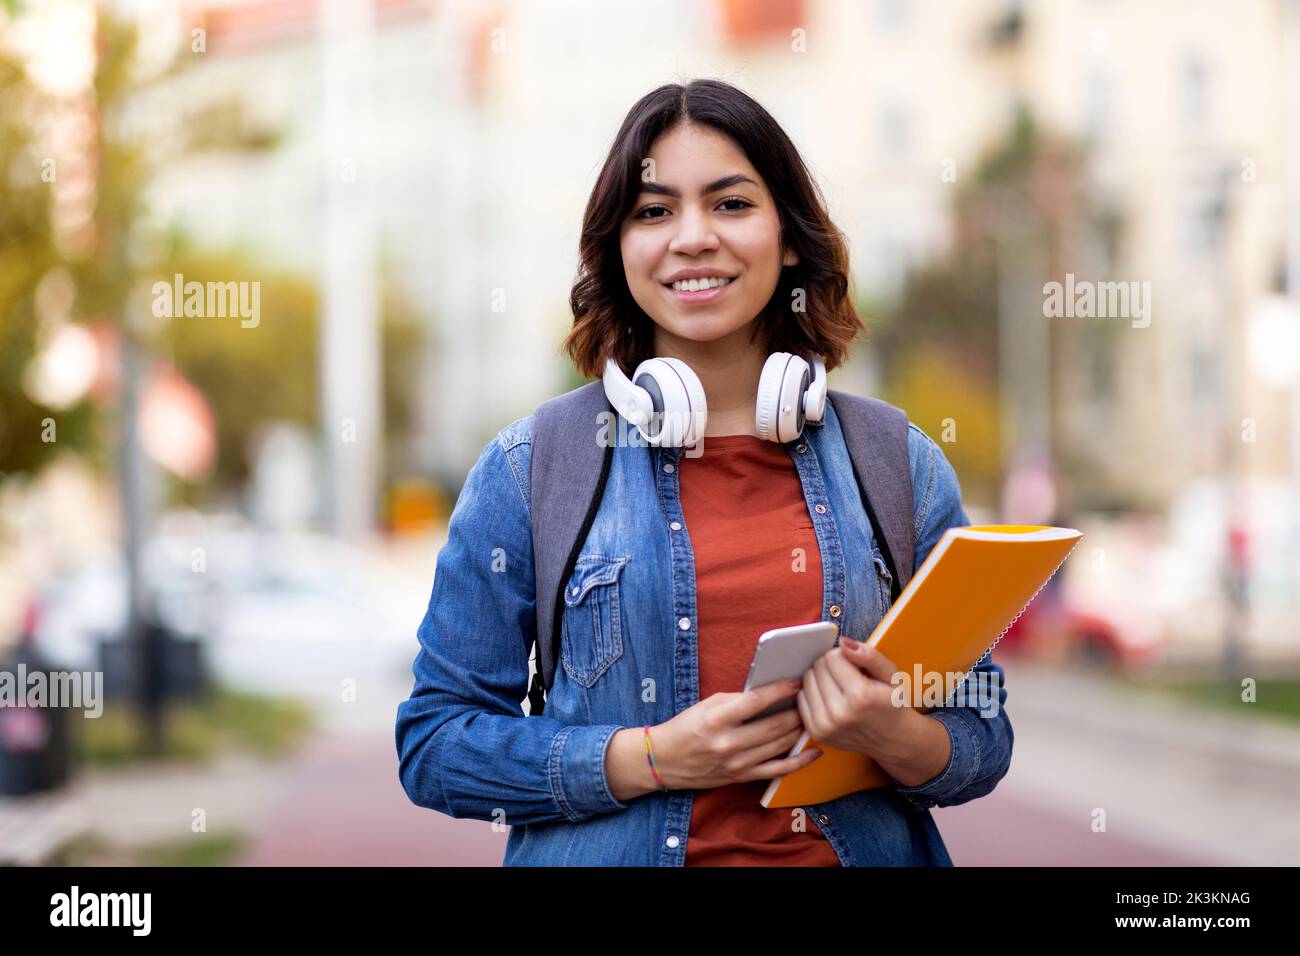 Modern Student. Smiling Young Arab Female With Workbooks And Smartphone Posing Outdoors Stock Photo